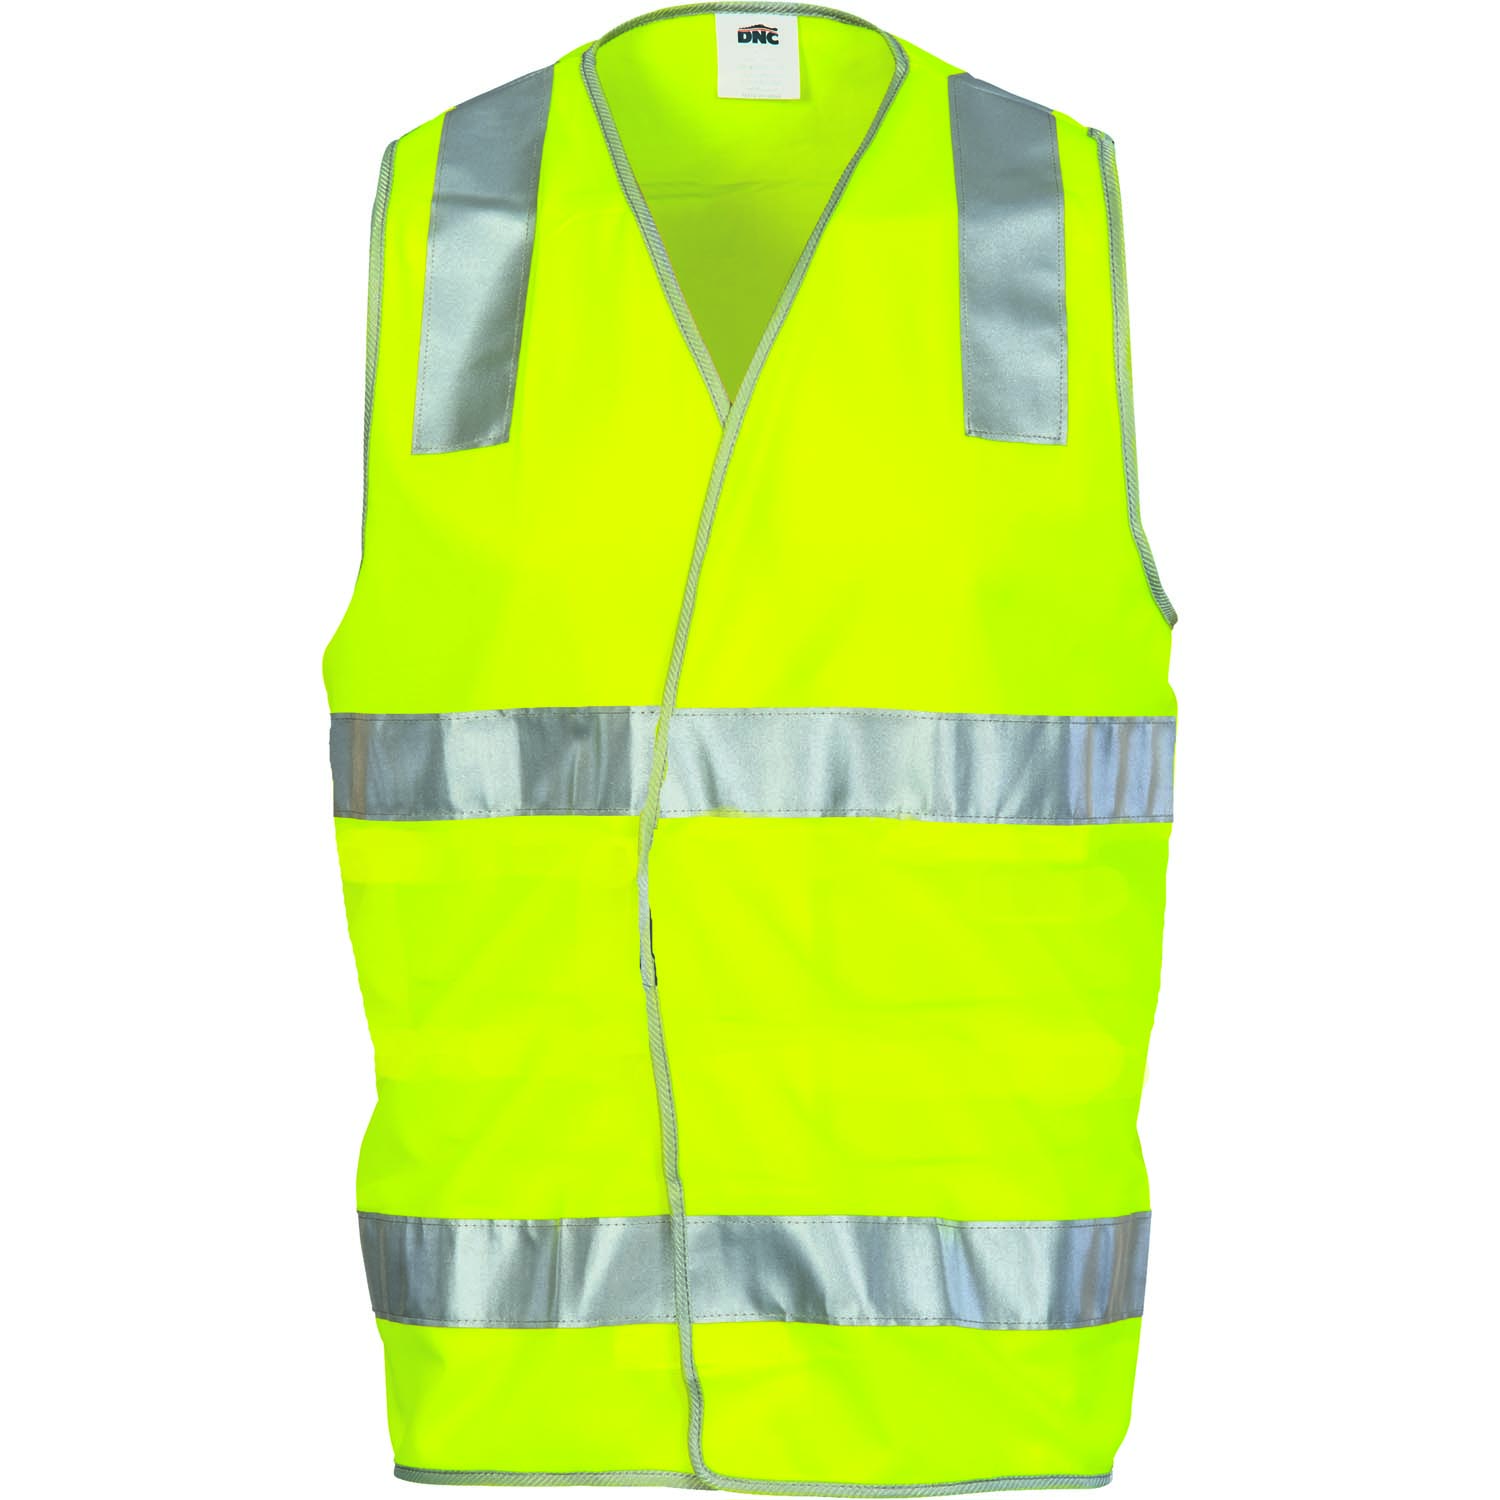 DNC Classic Day and Night Safety Vest